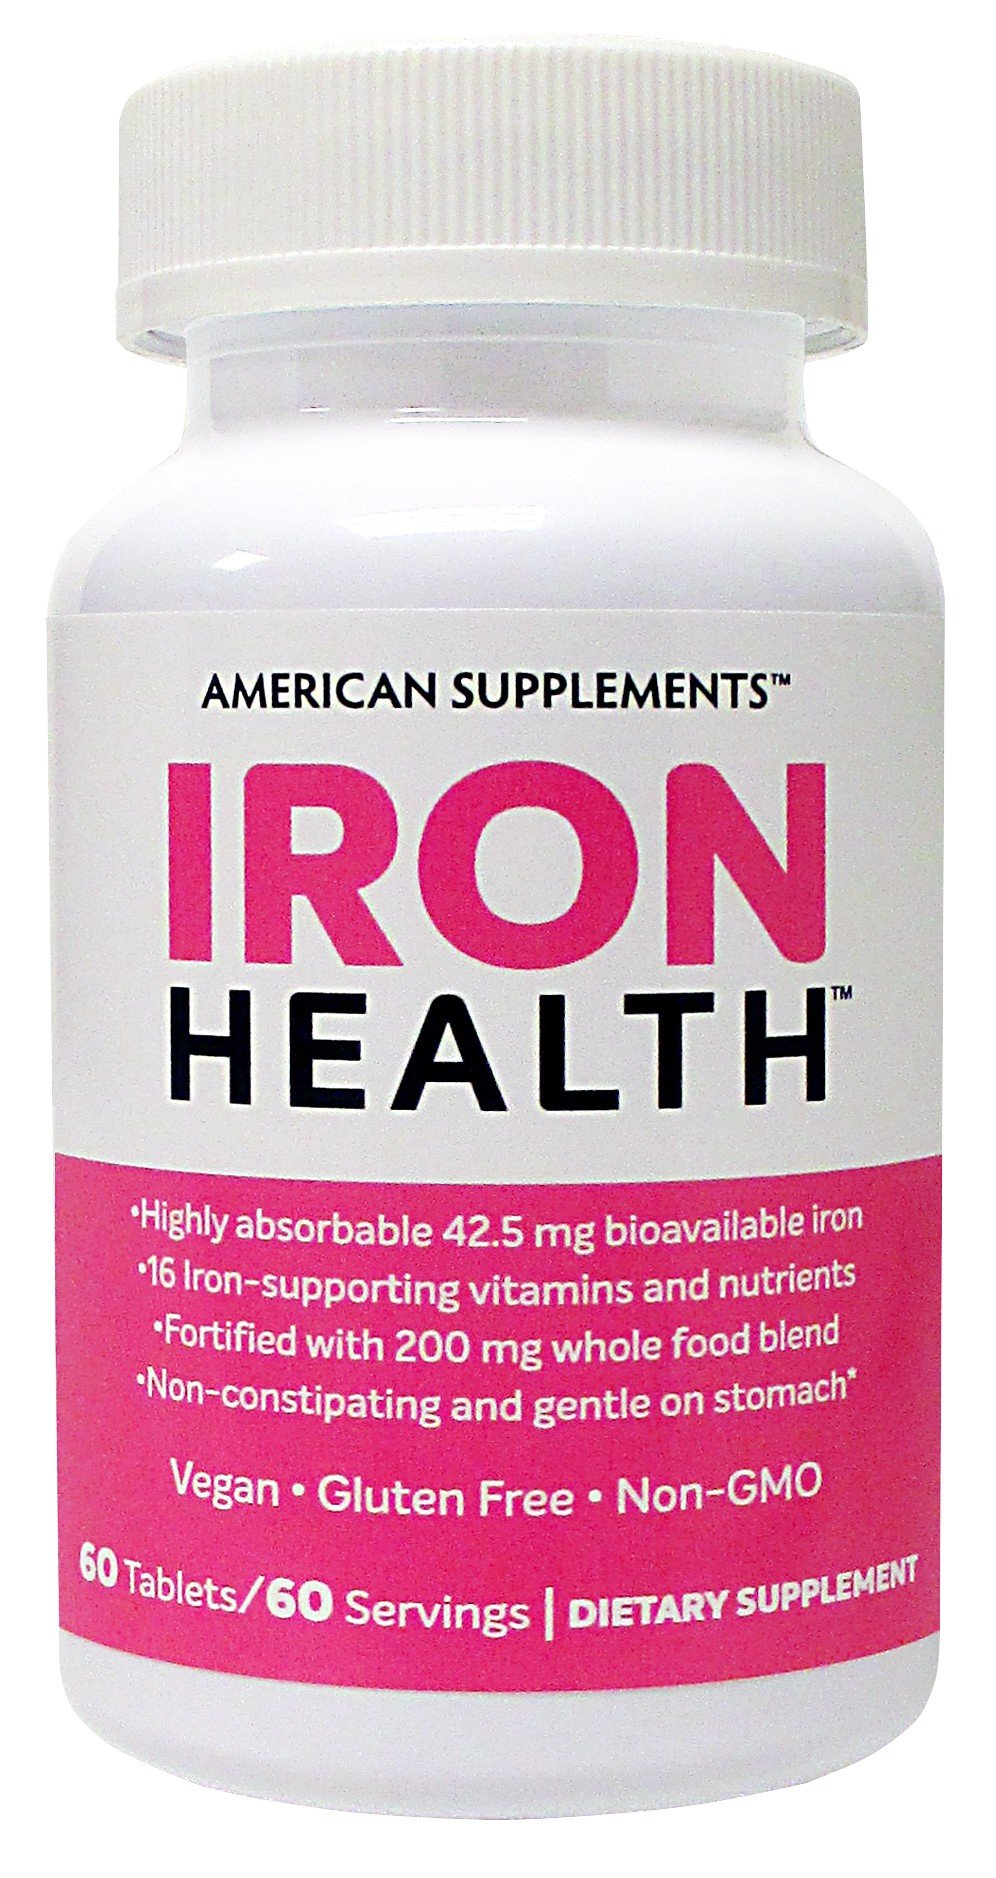 American Supplements Iron Health 60 Tablets